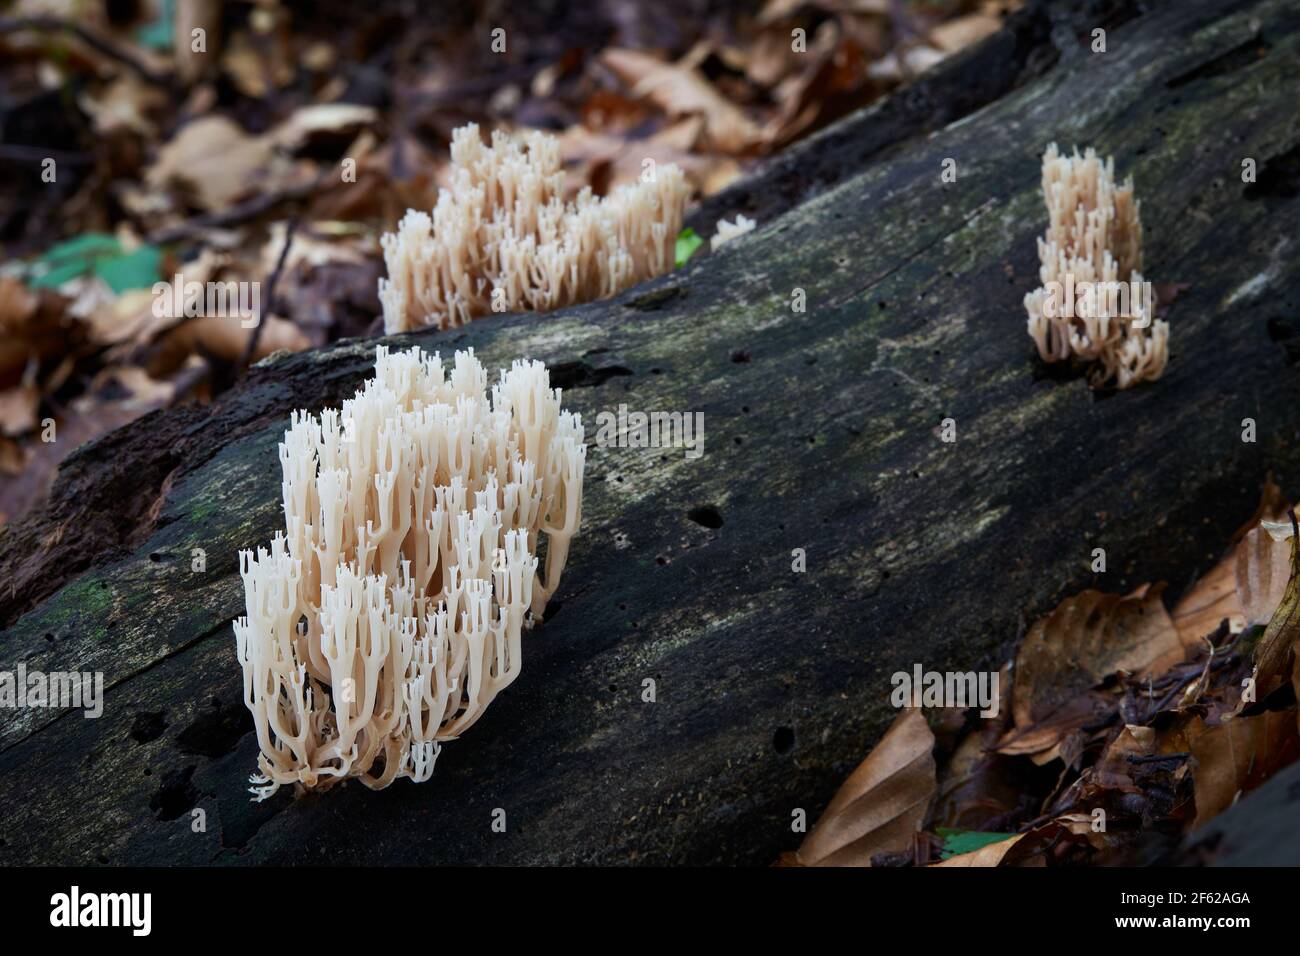 inedible fungus grows in forests, Central Europe, Artomyces pyxidatus Stock Photo